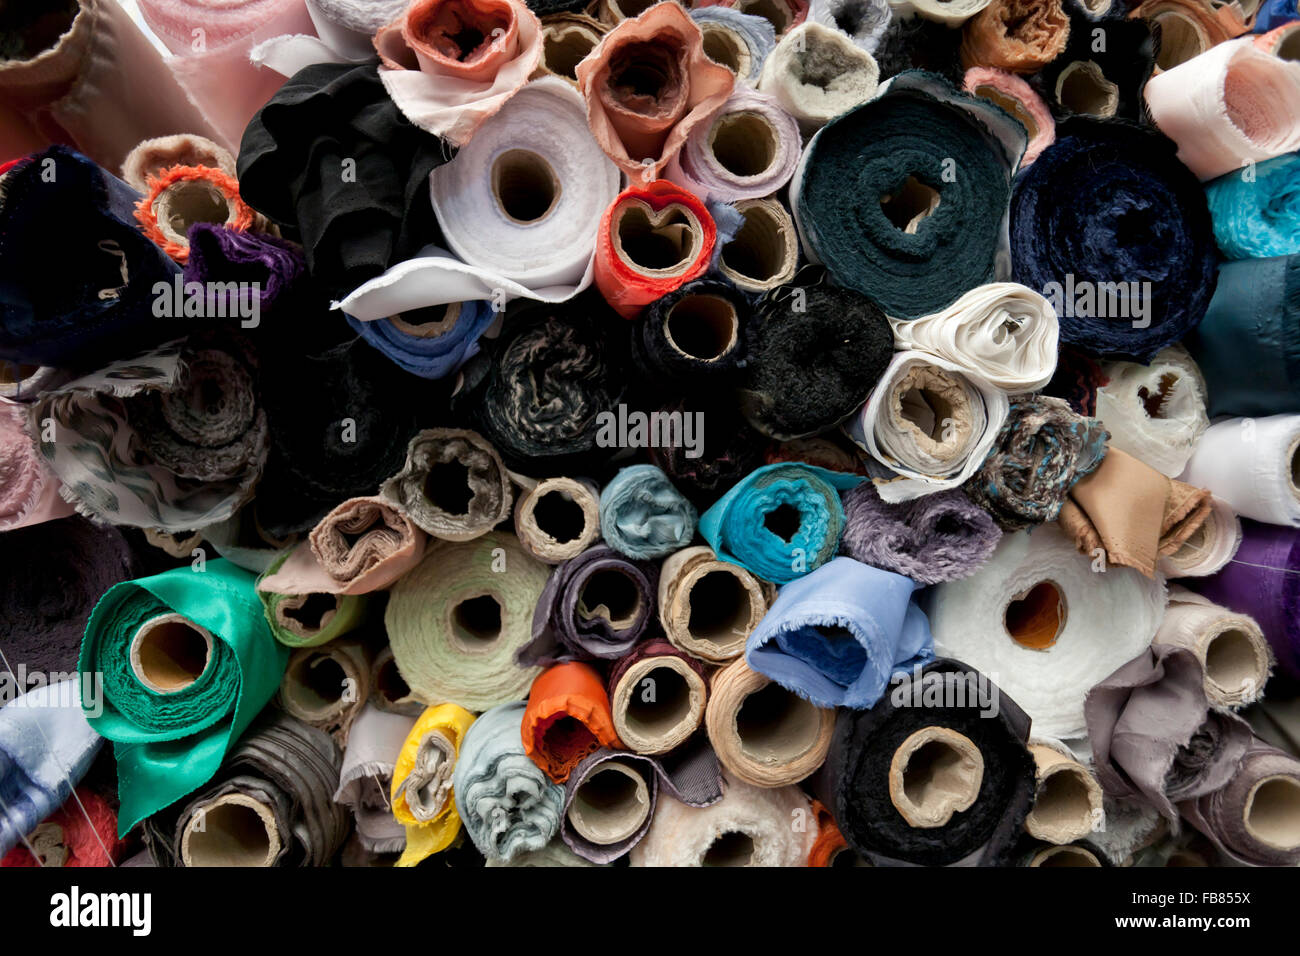 Rolls of fabric and textiles in a shop Stock Photo